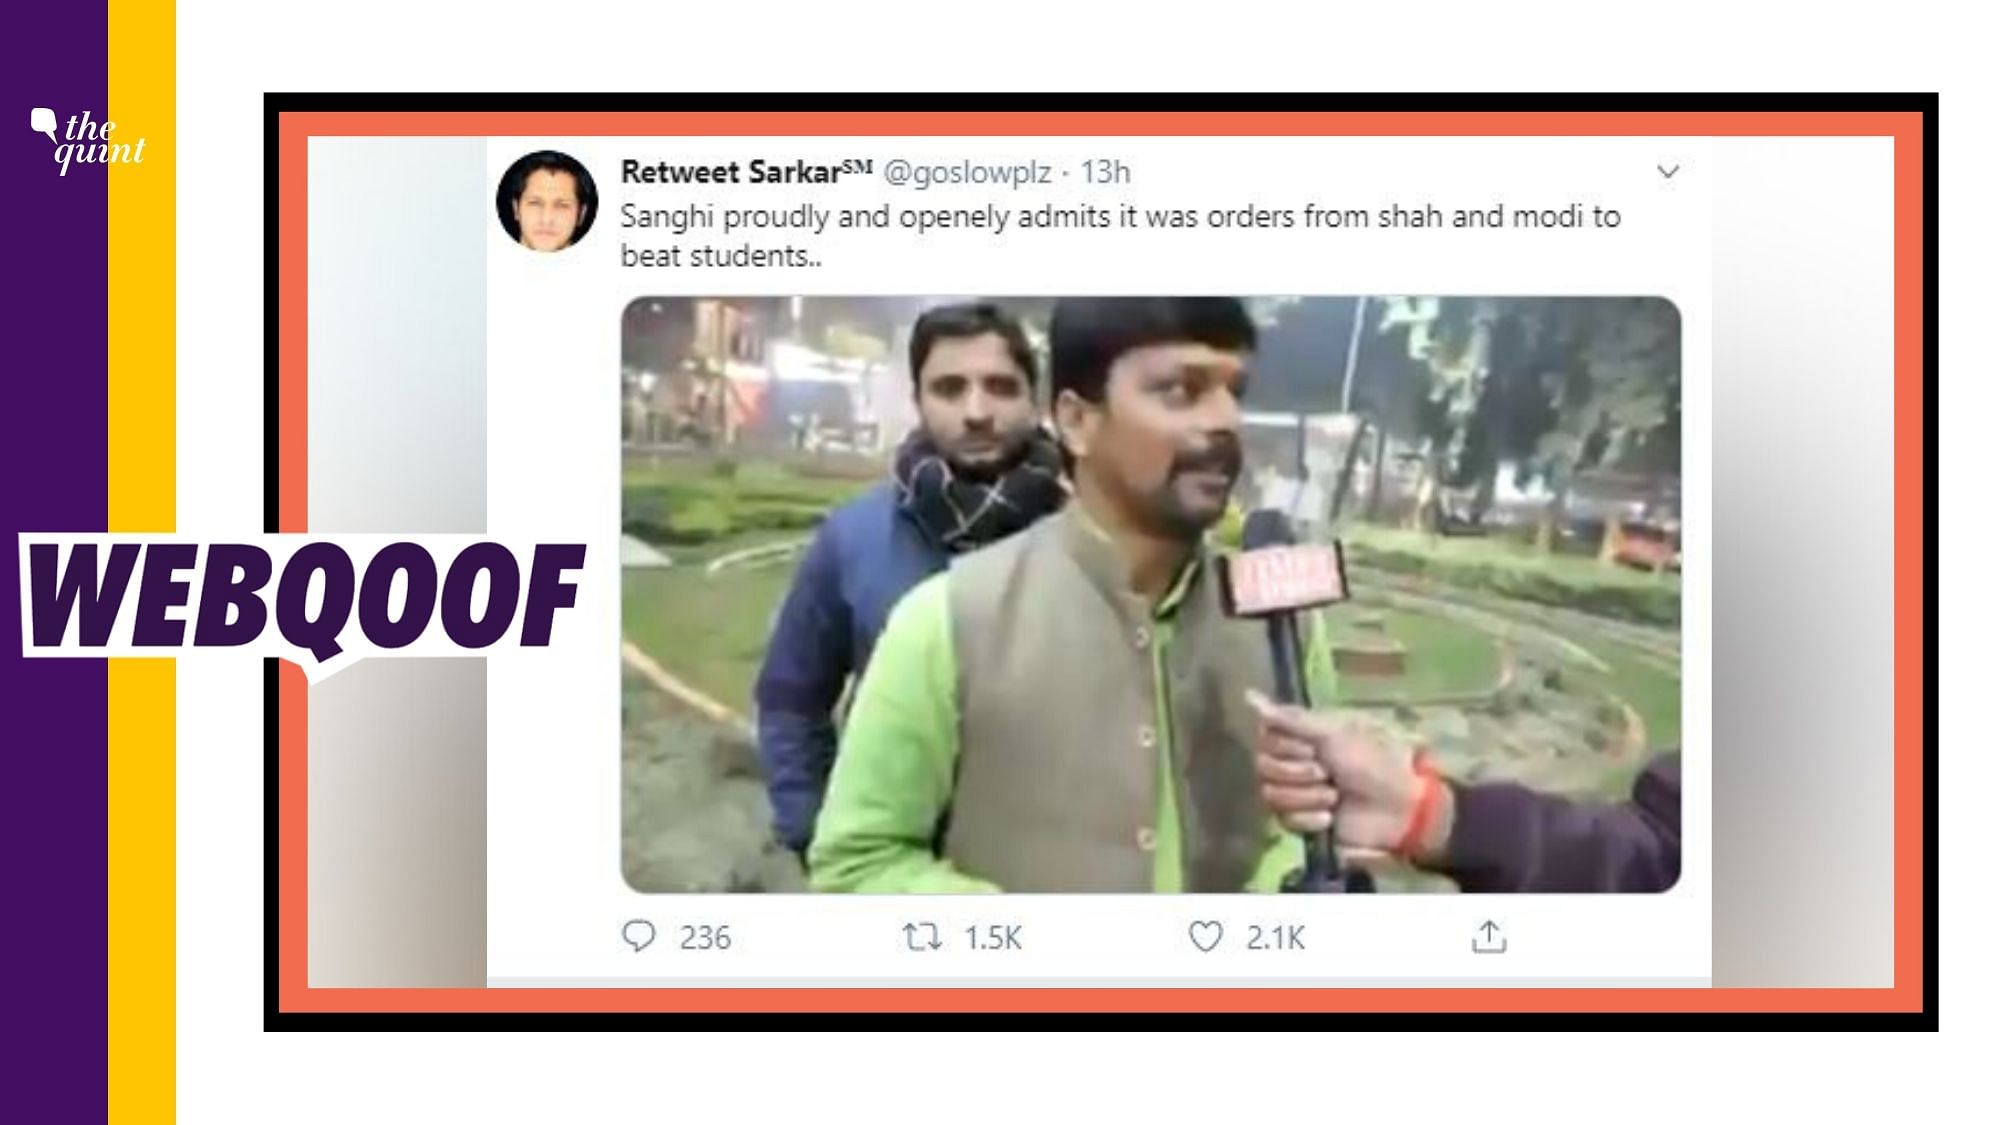 A video on social media is being circulated with a claim that a BJP leader has himself “exposed” the party’s involvement in violence against students.&nbsp;